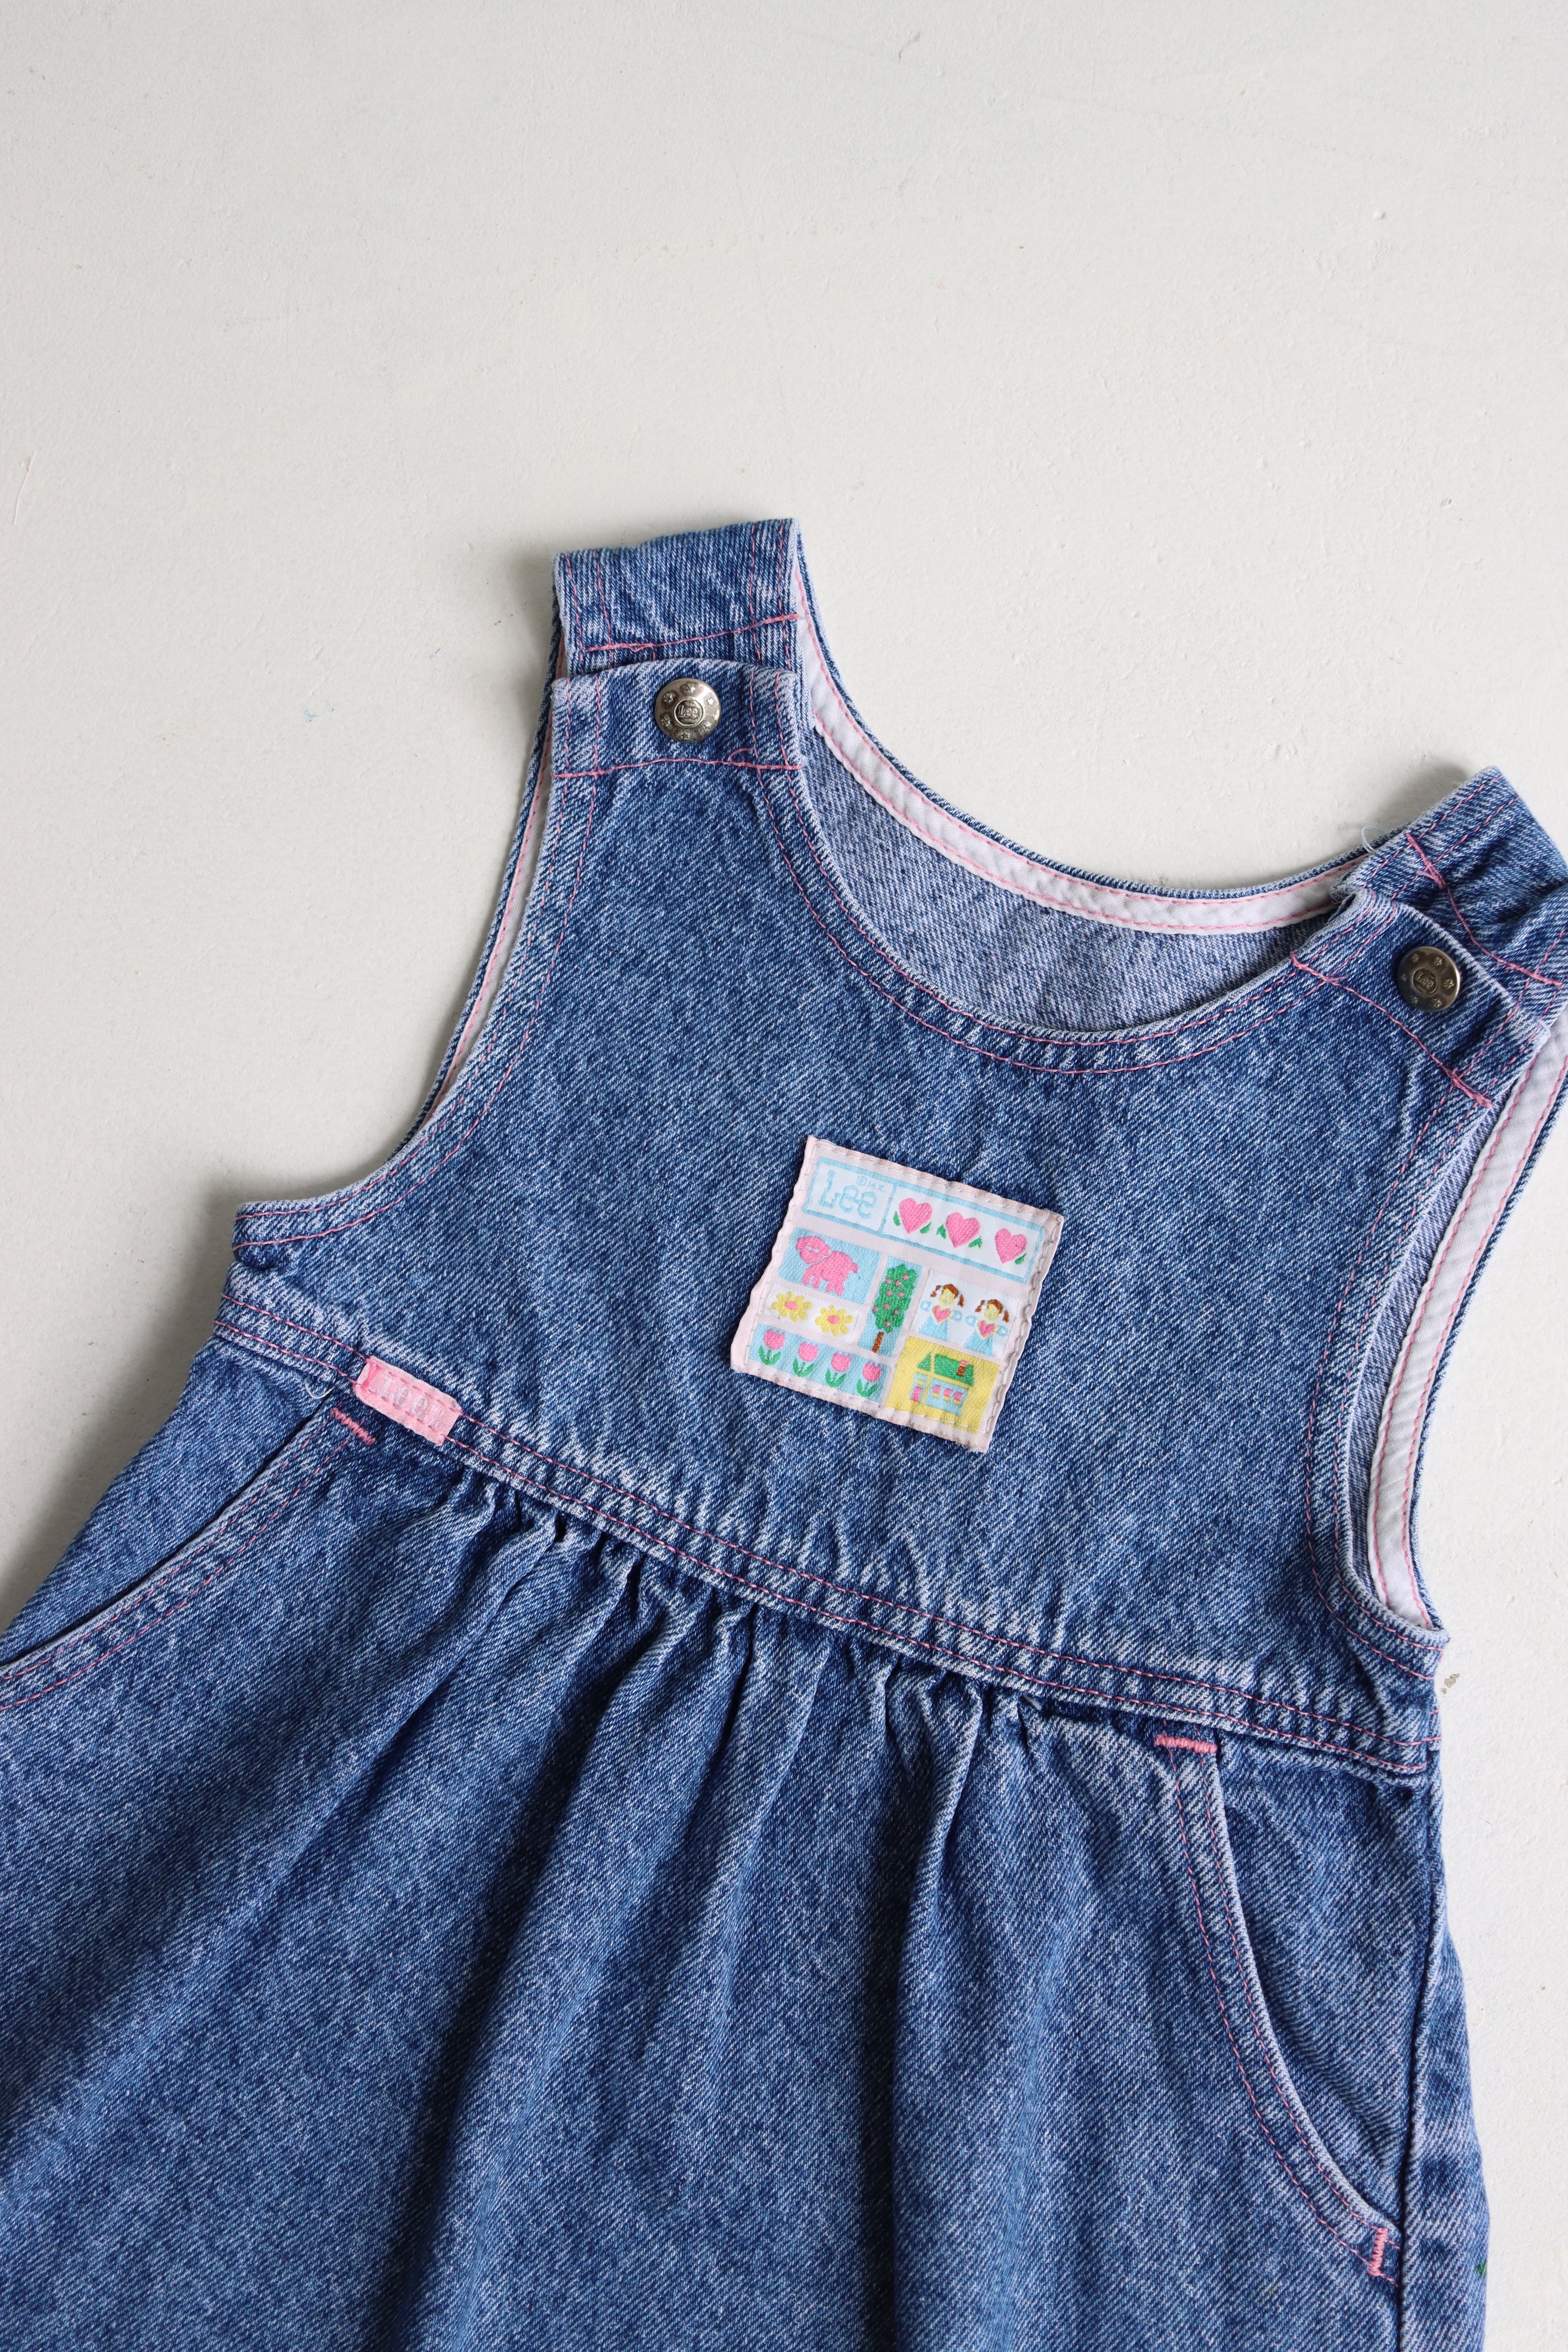 Vintage Lee denim dress - size 6 years - made in USA